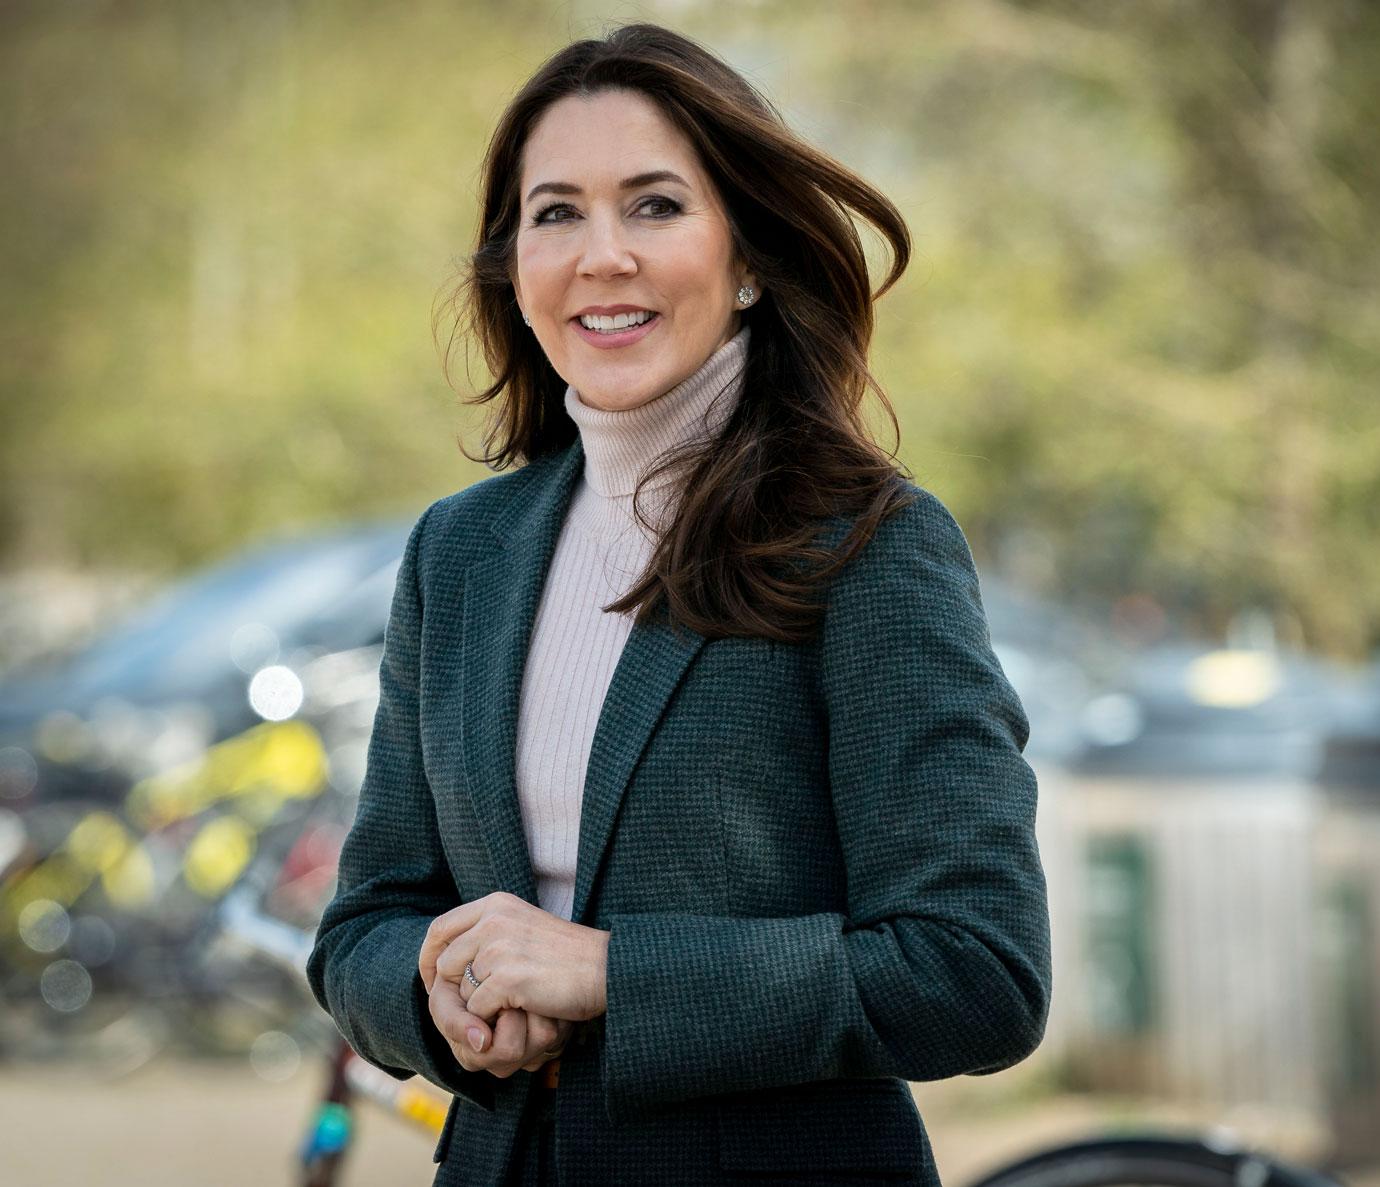 Crown Princess Mary Of Denmark Attends Danish Science Day 2021: Photos